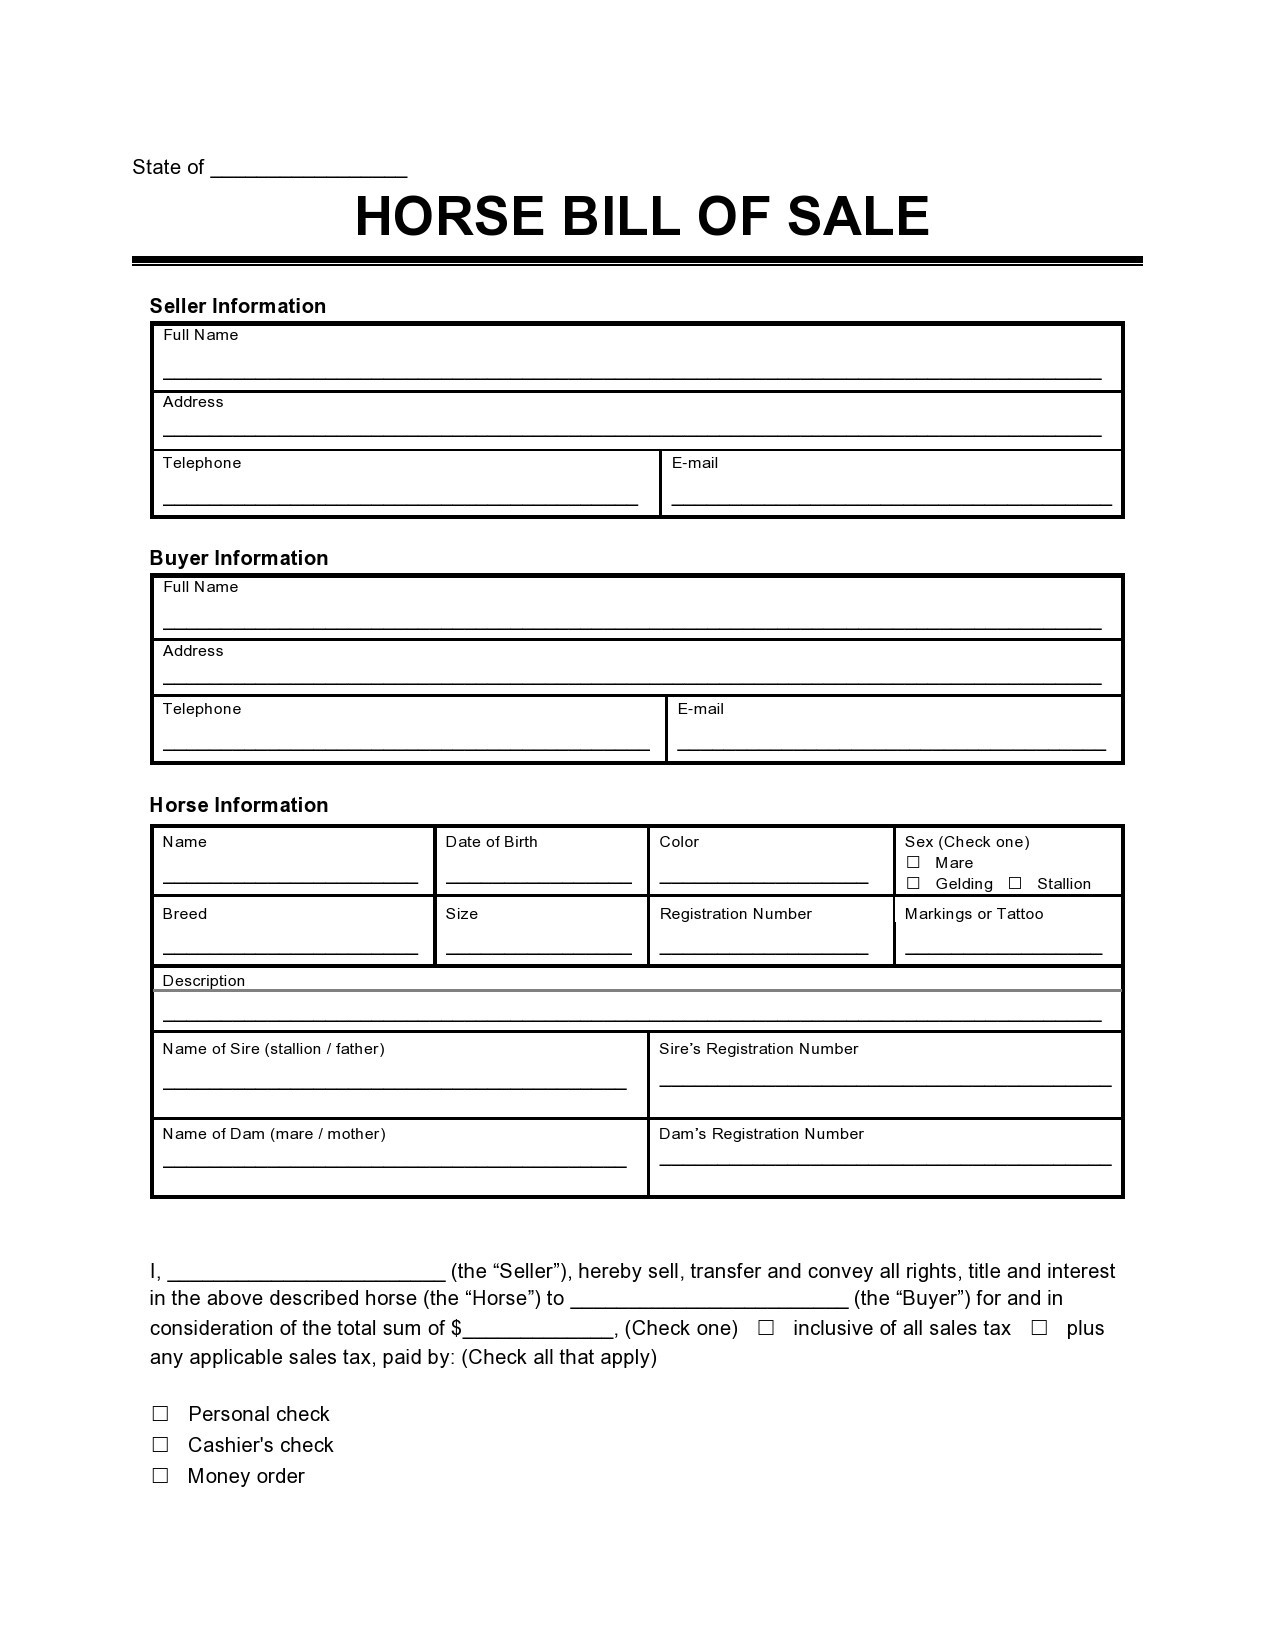 42 Printable Horse Bill of Sale Forms [& Templates] ᐅ TemplateLab